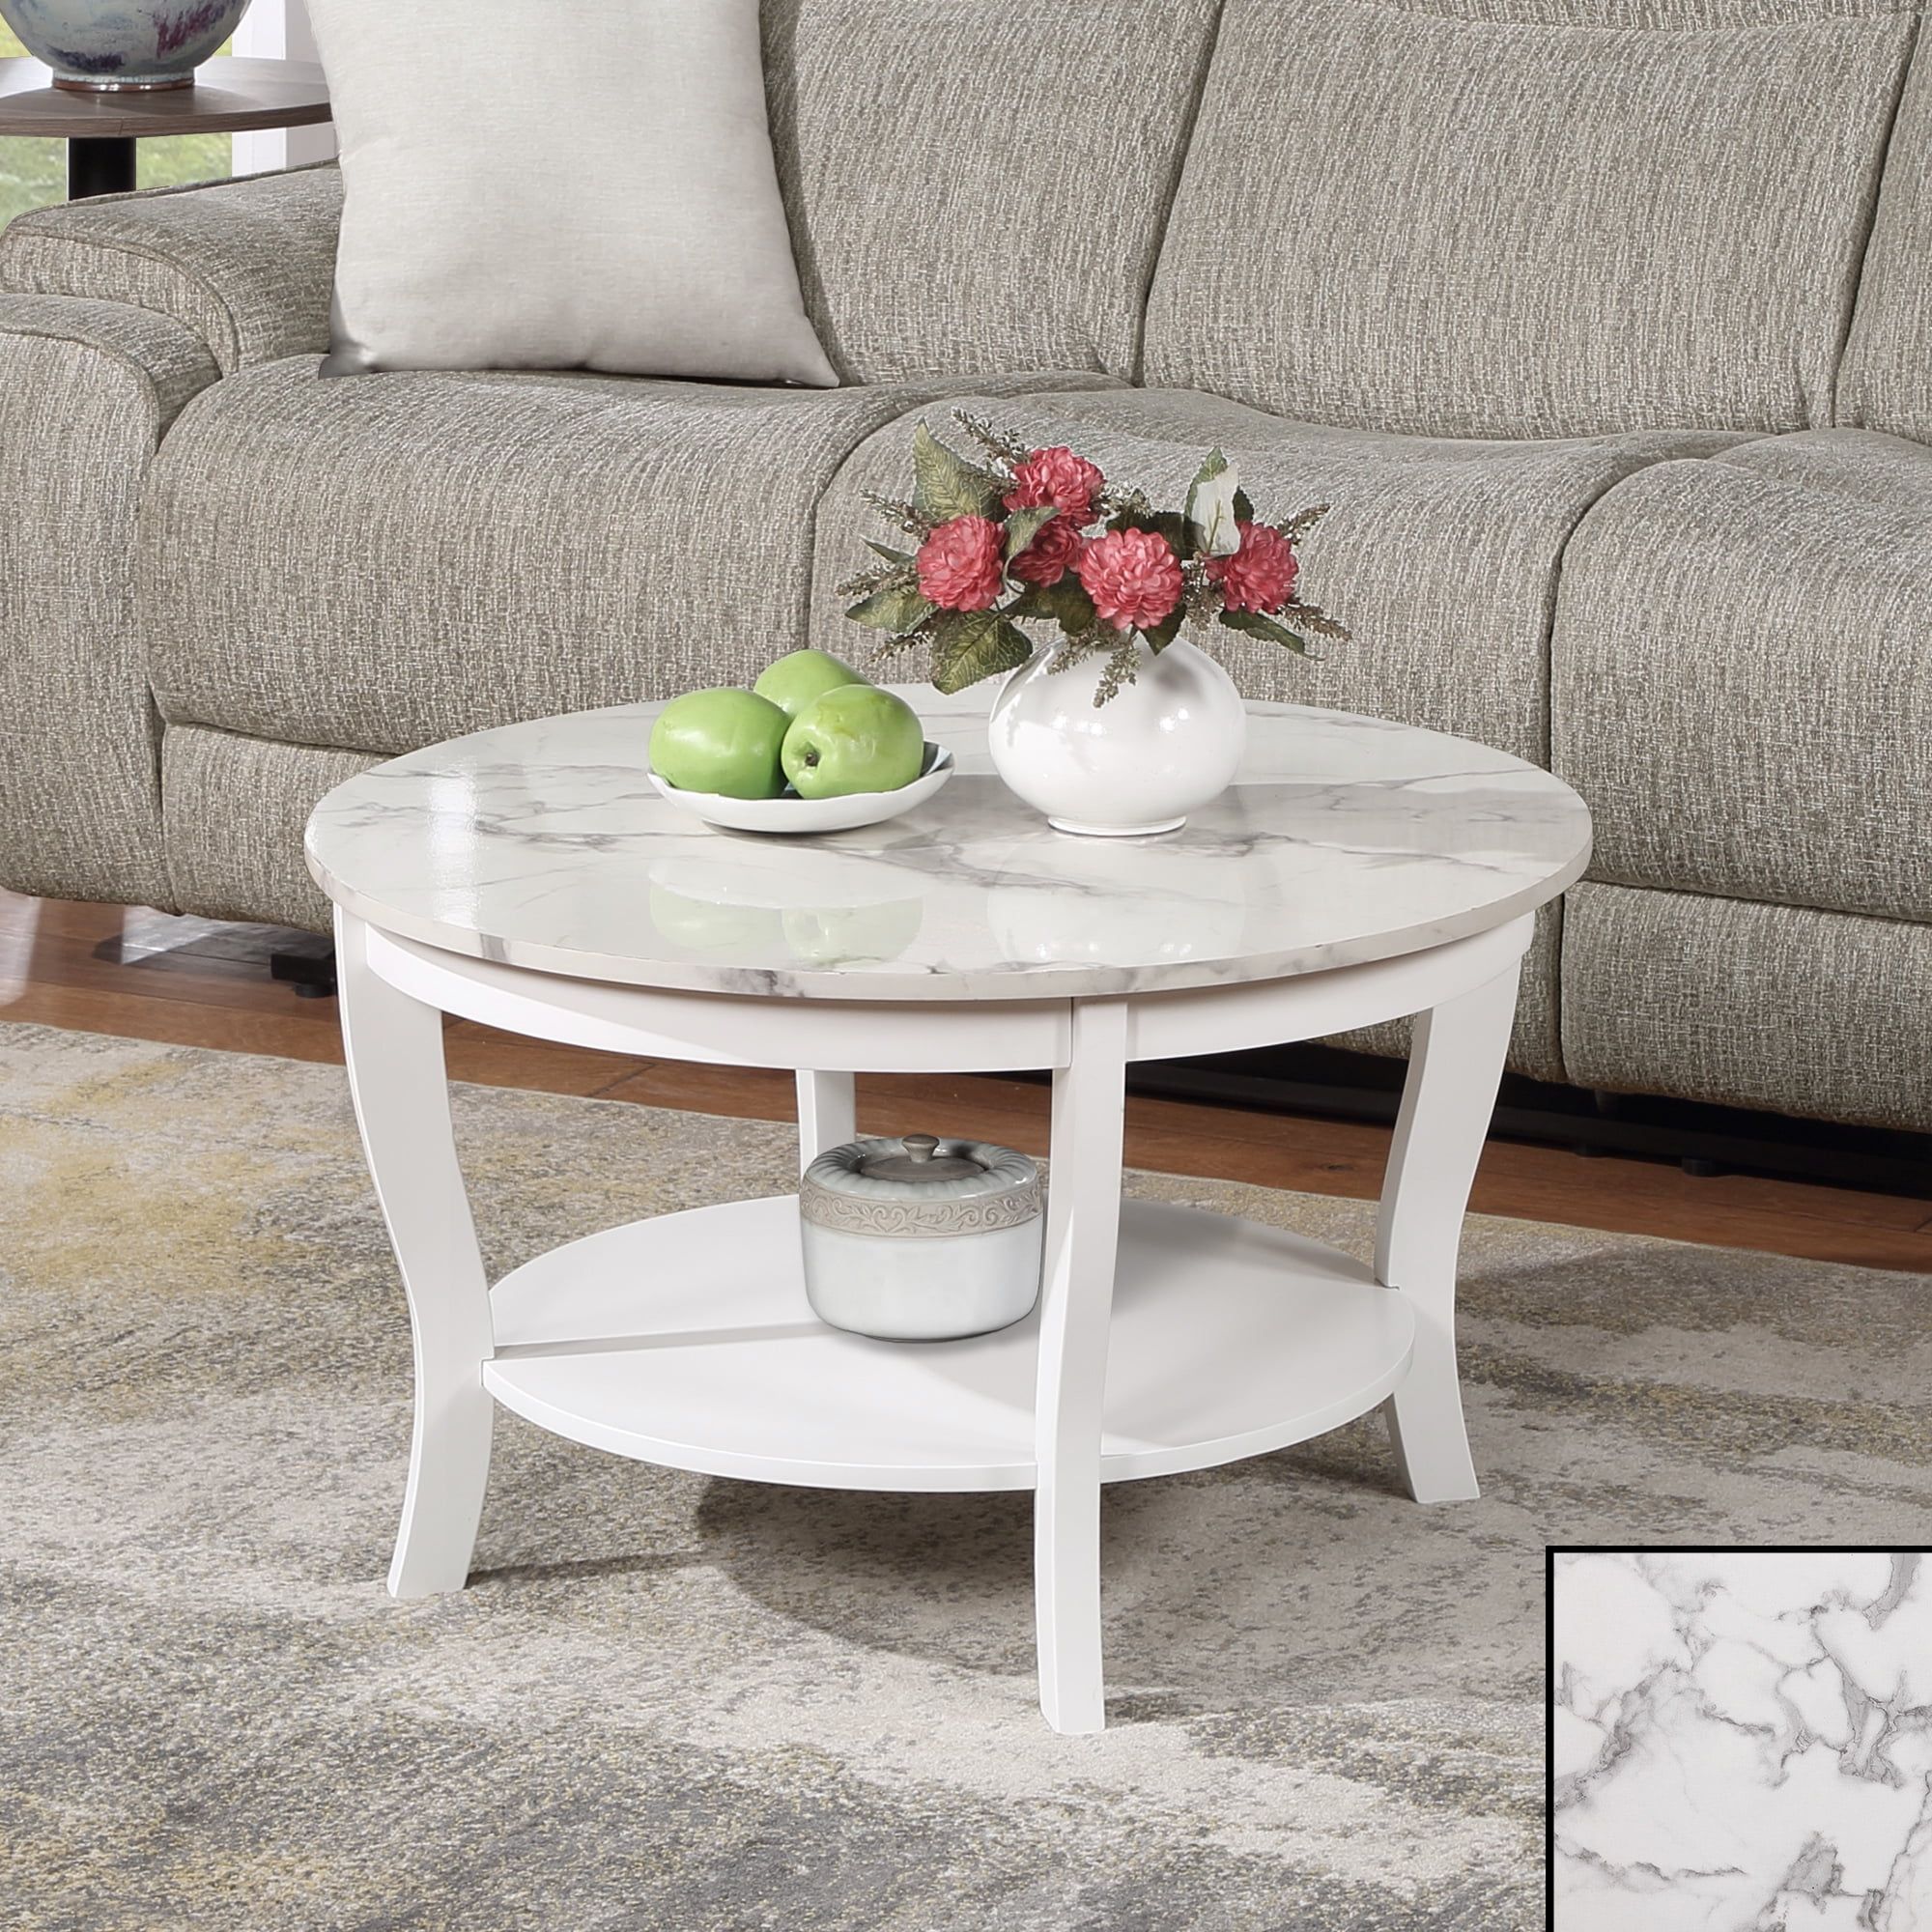 Convenience Concepts American Heritage Round Coffee Table With Shelf, White  Faux Marble/White – Walmart With Regard To American Heritage Round Coffee Tables (View 3 of 15)